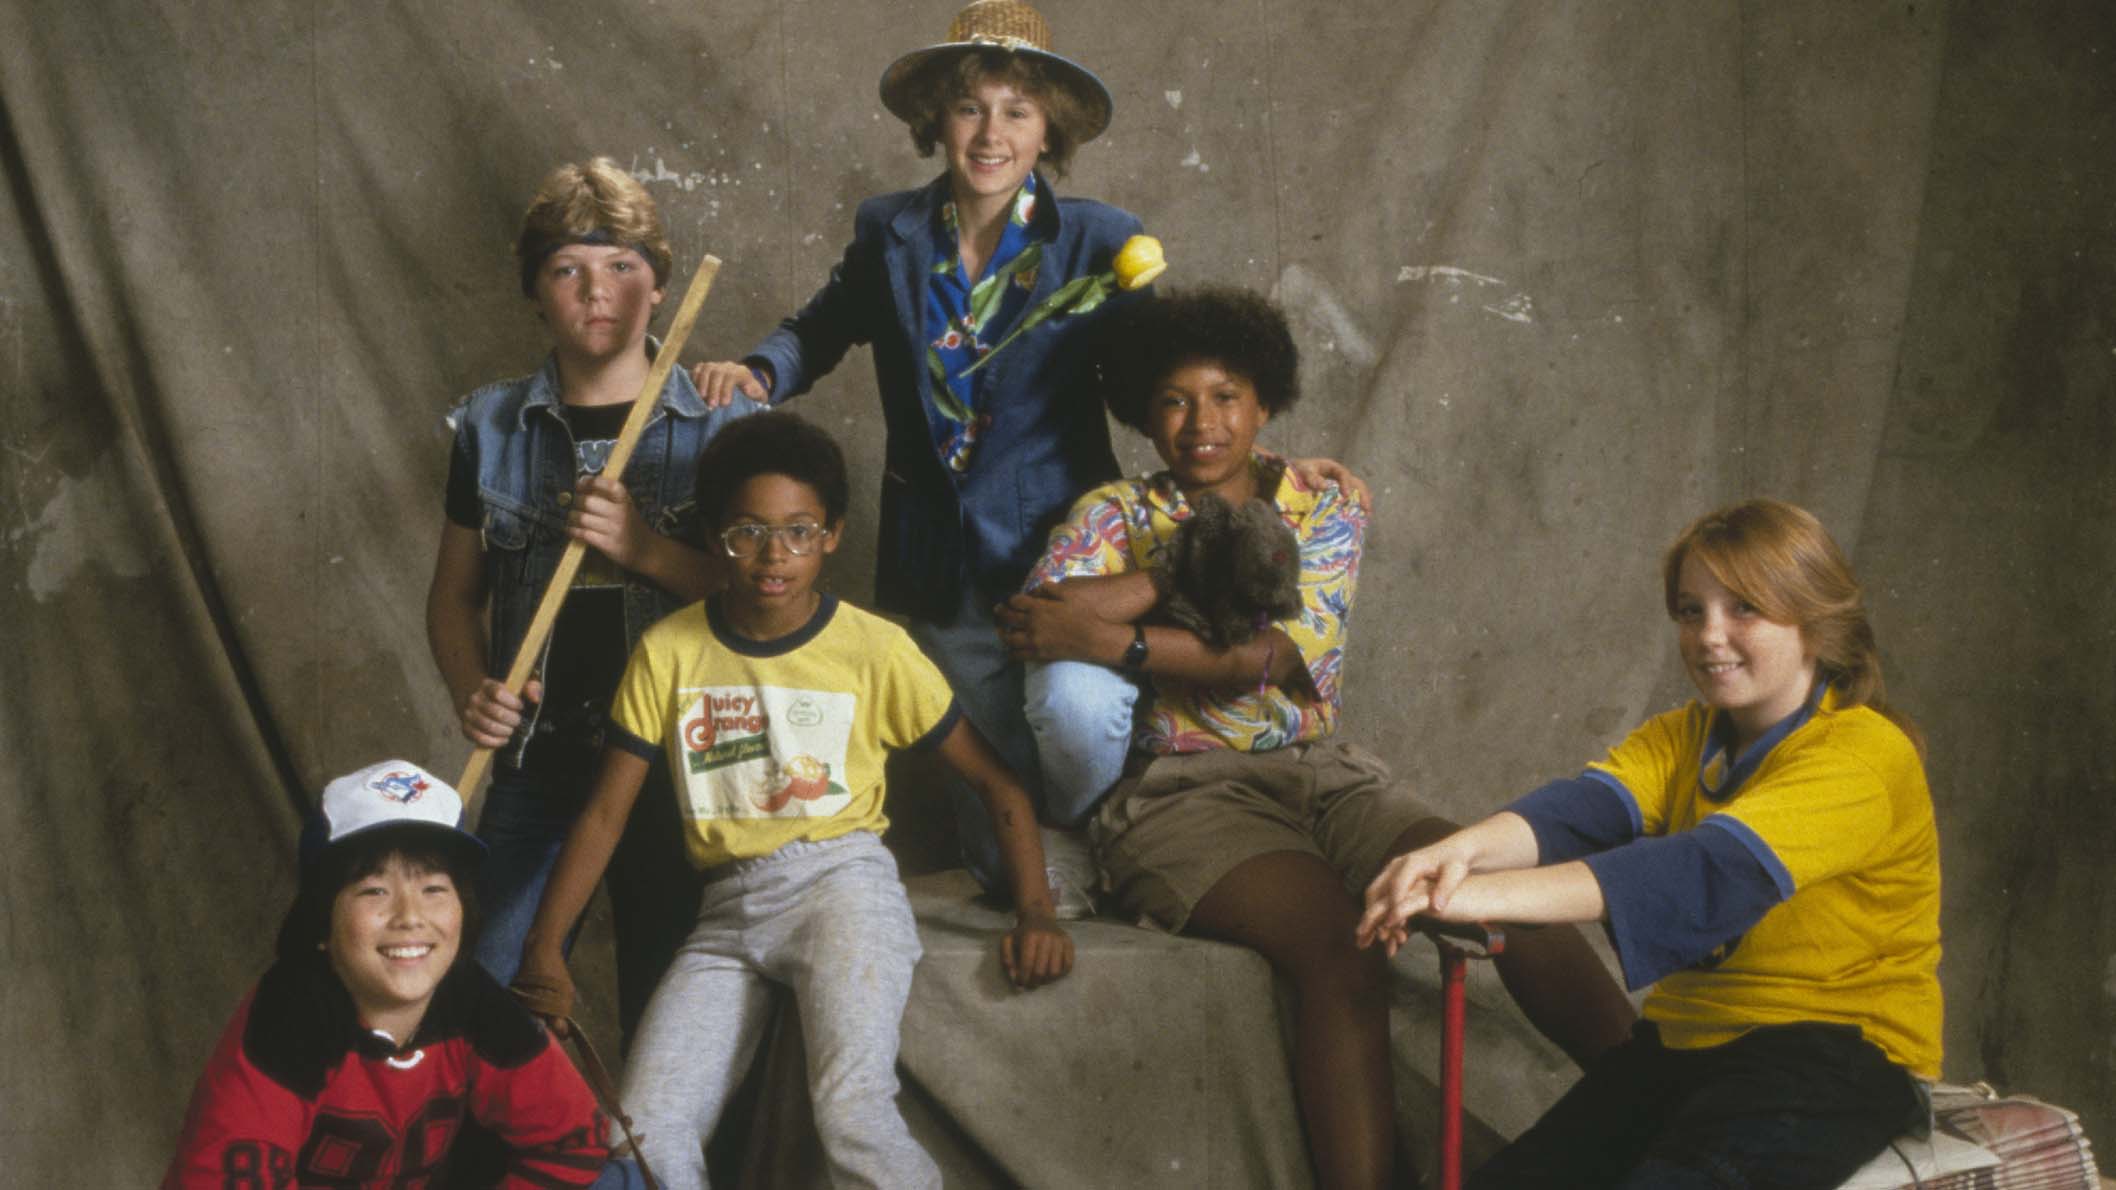 A group of young kids from the 1970s, posing for a photo in front of a beige photography backdrop.